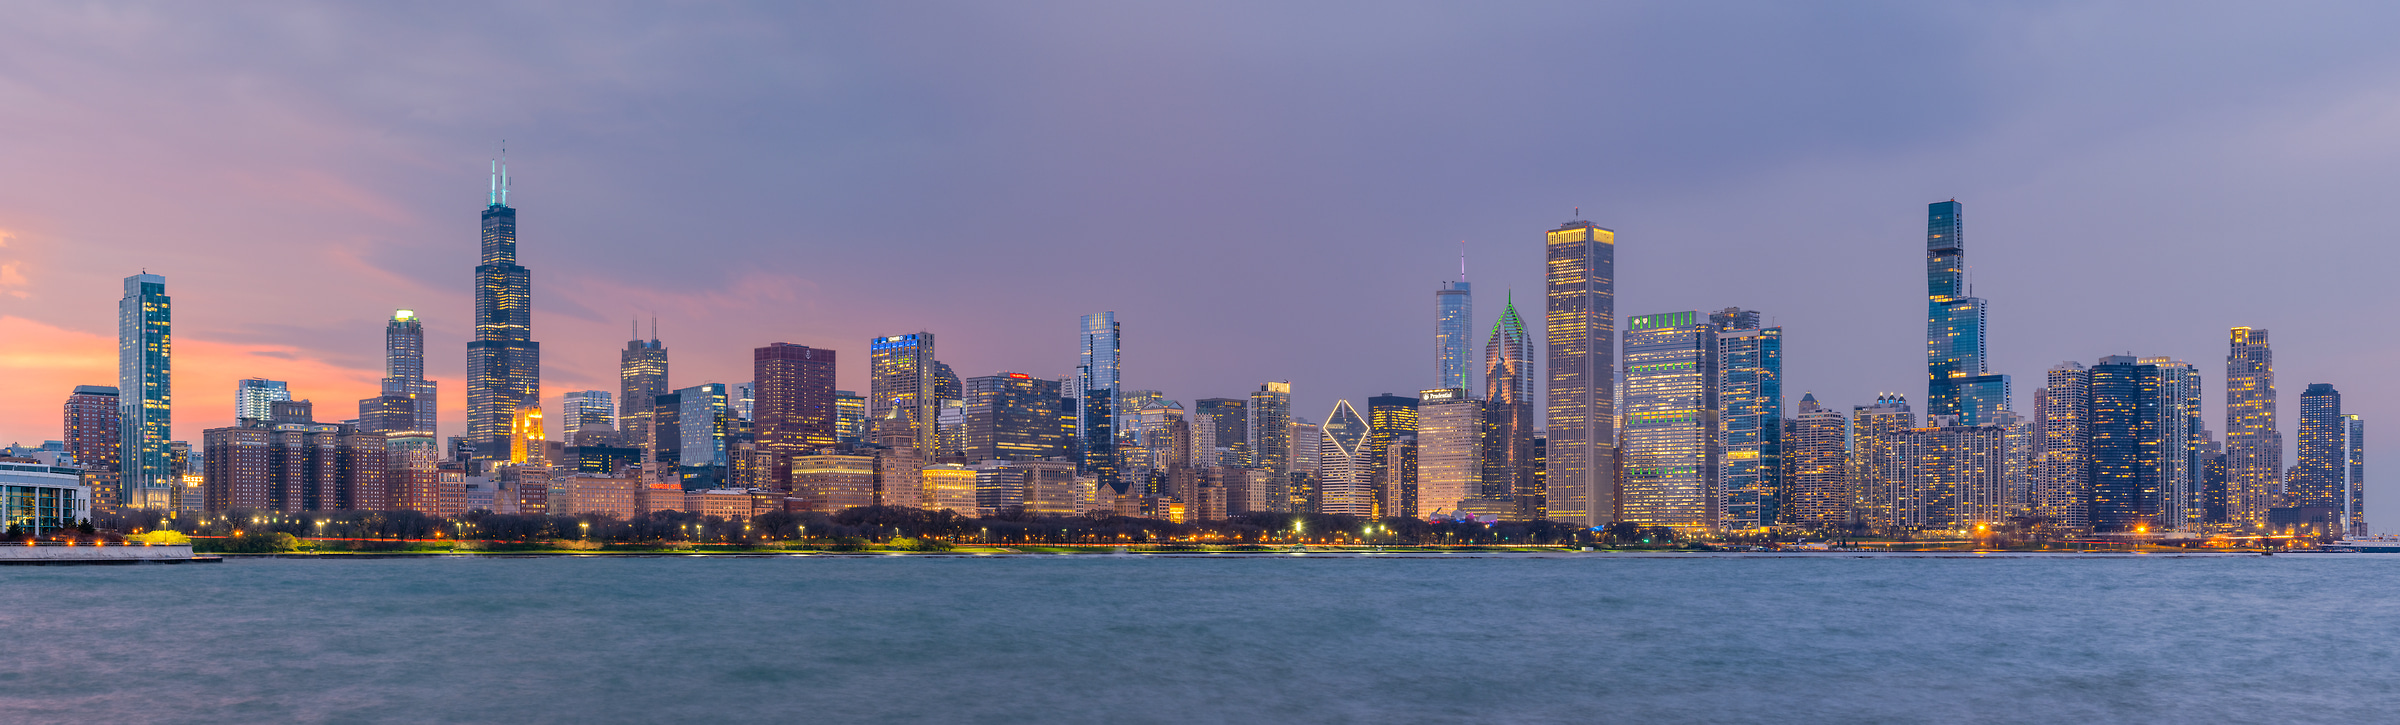 376 megapixels! A very high resolution, large-format VAST photo print of the Chicago skyline at sunset; cityscape photograph created by Chris Blake in Chicago, Illinois